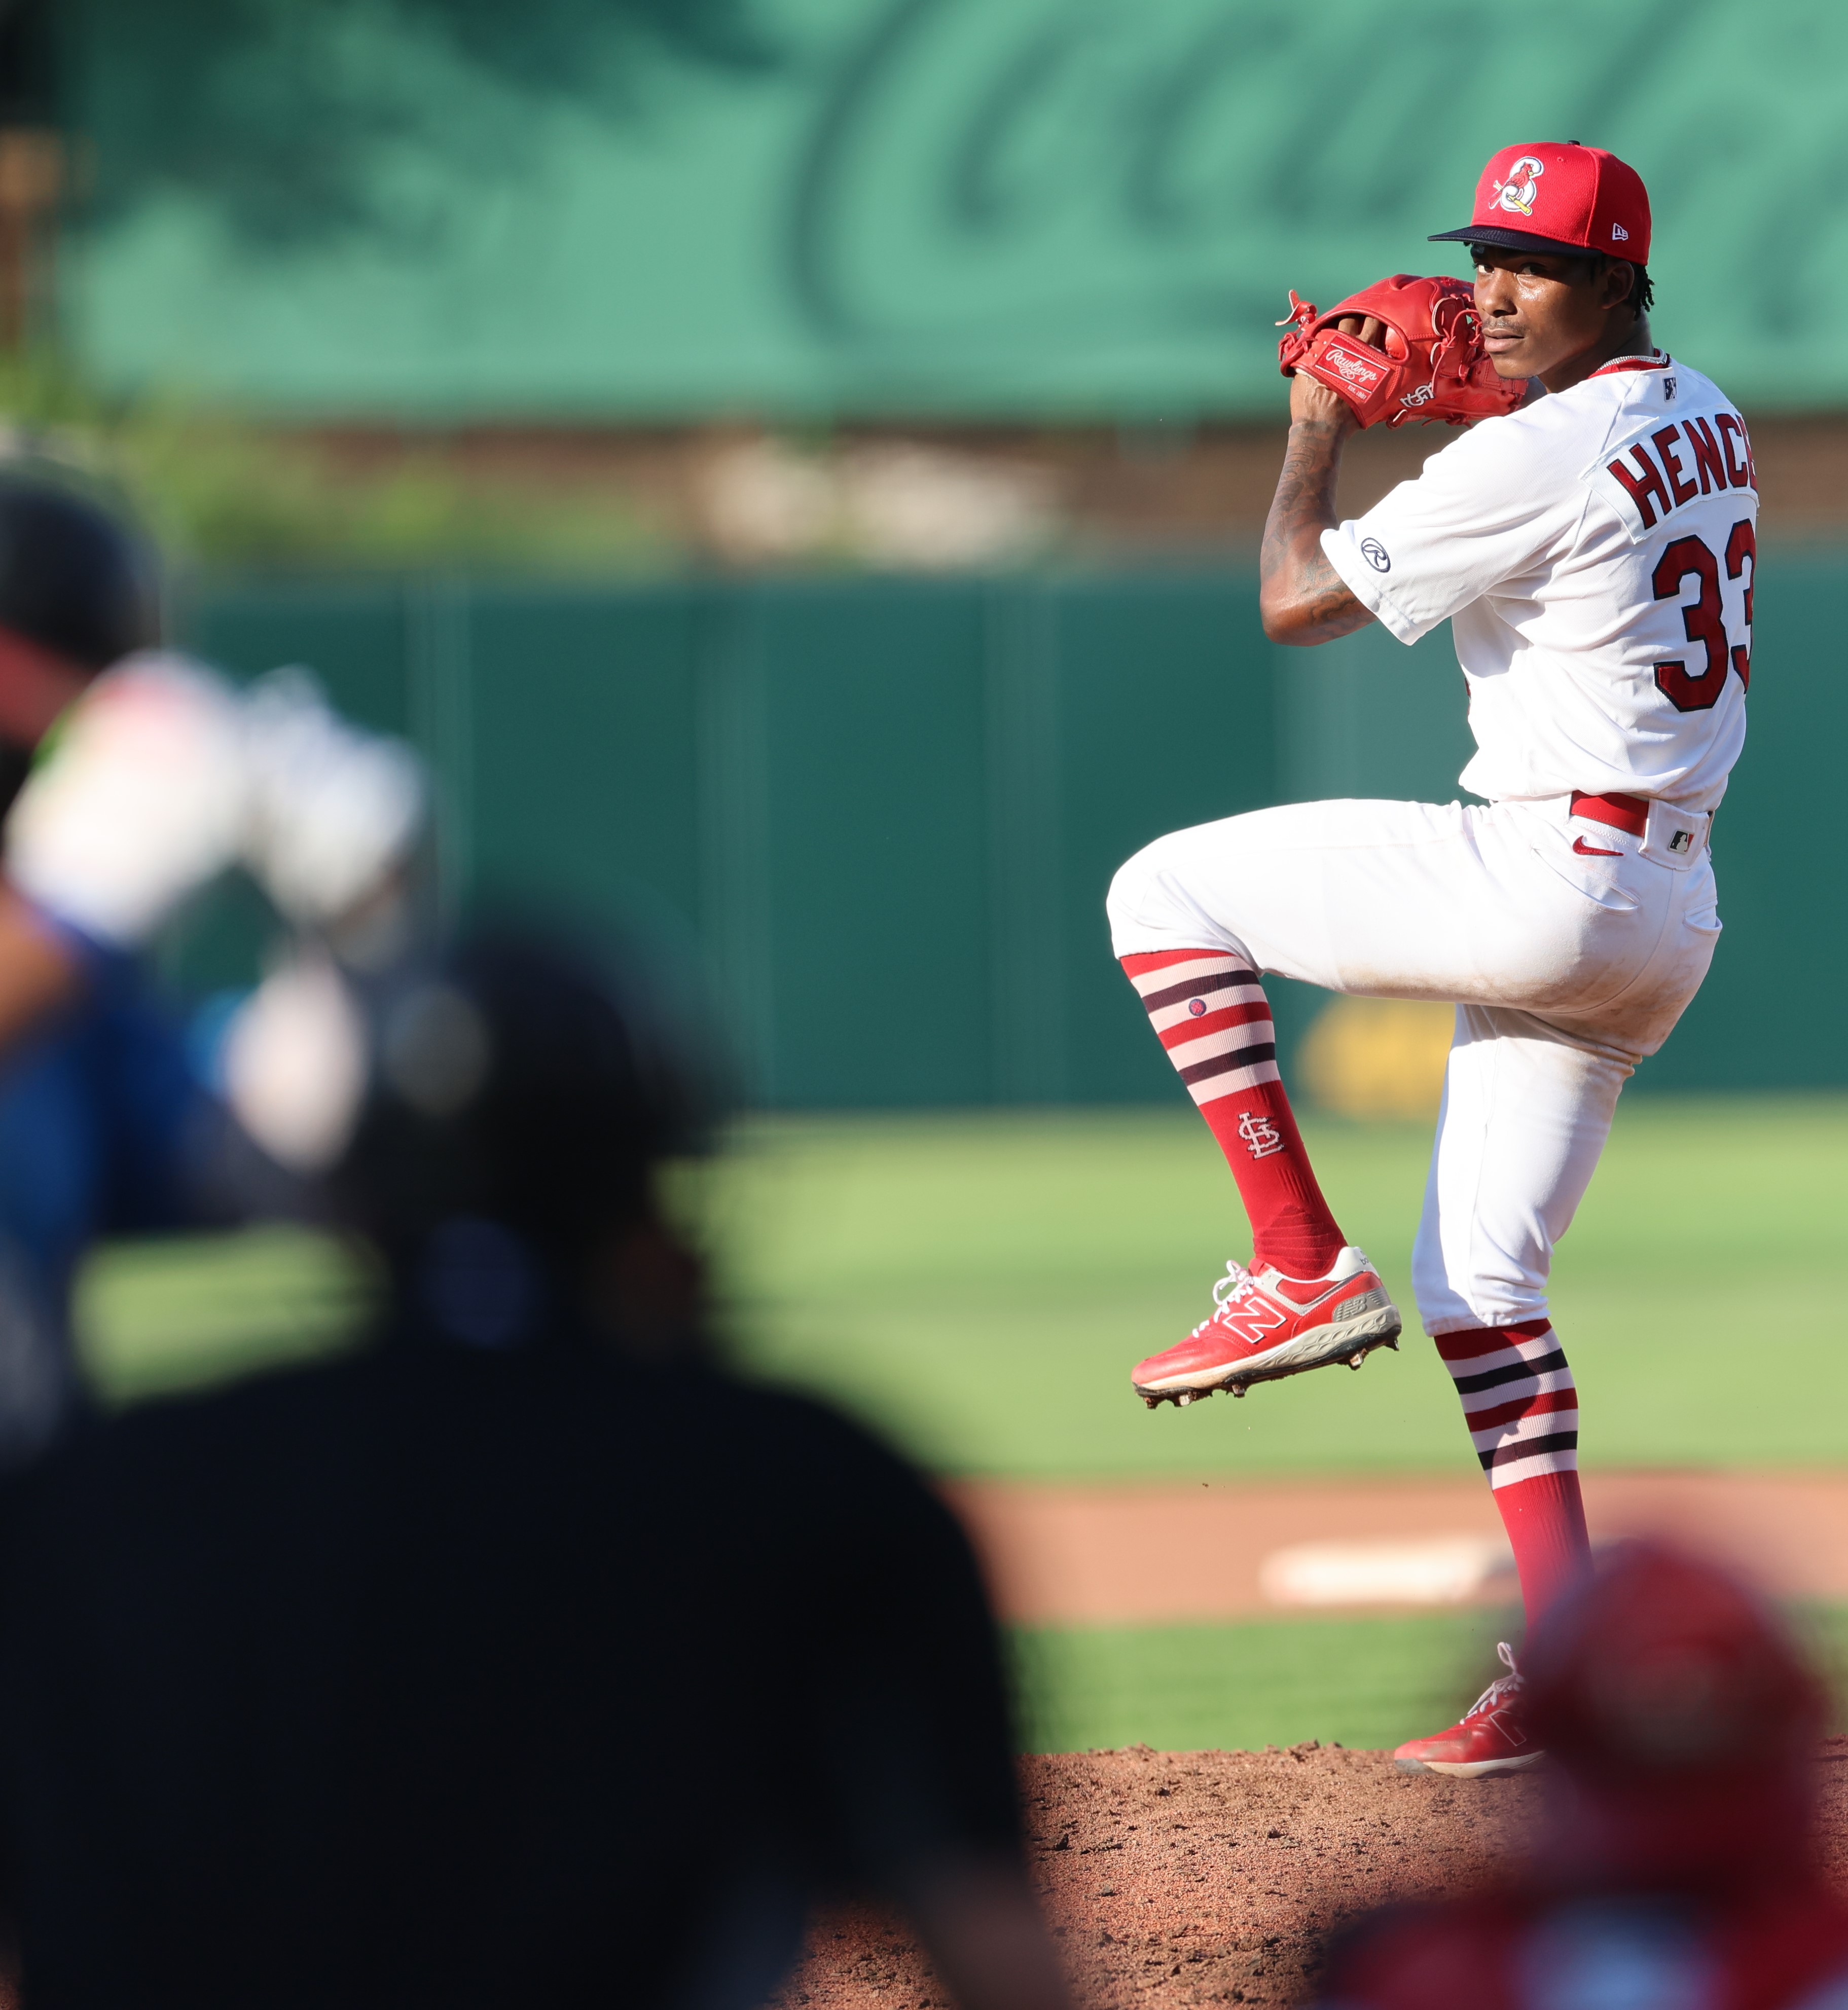 Tink Hence, wearing a Springfield Cardinals uniform, pitches the baseball during a game.